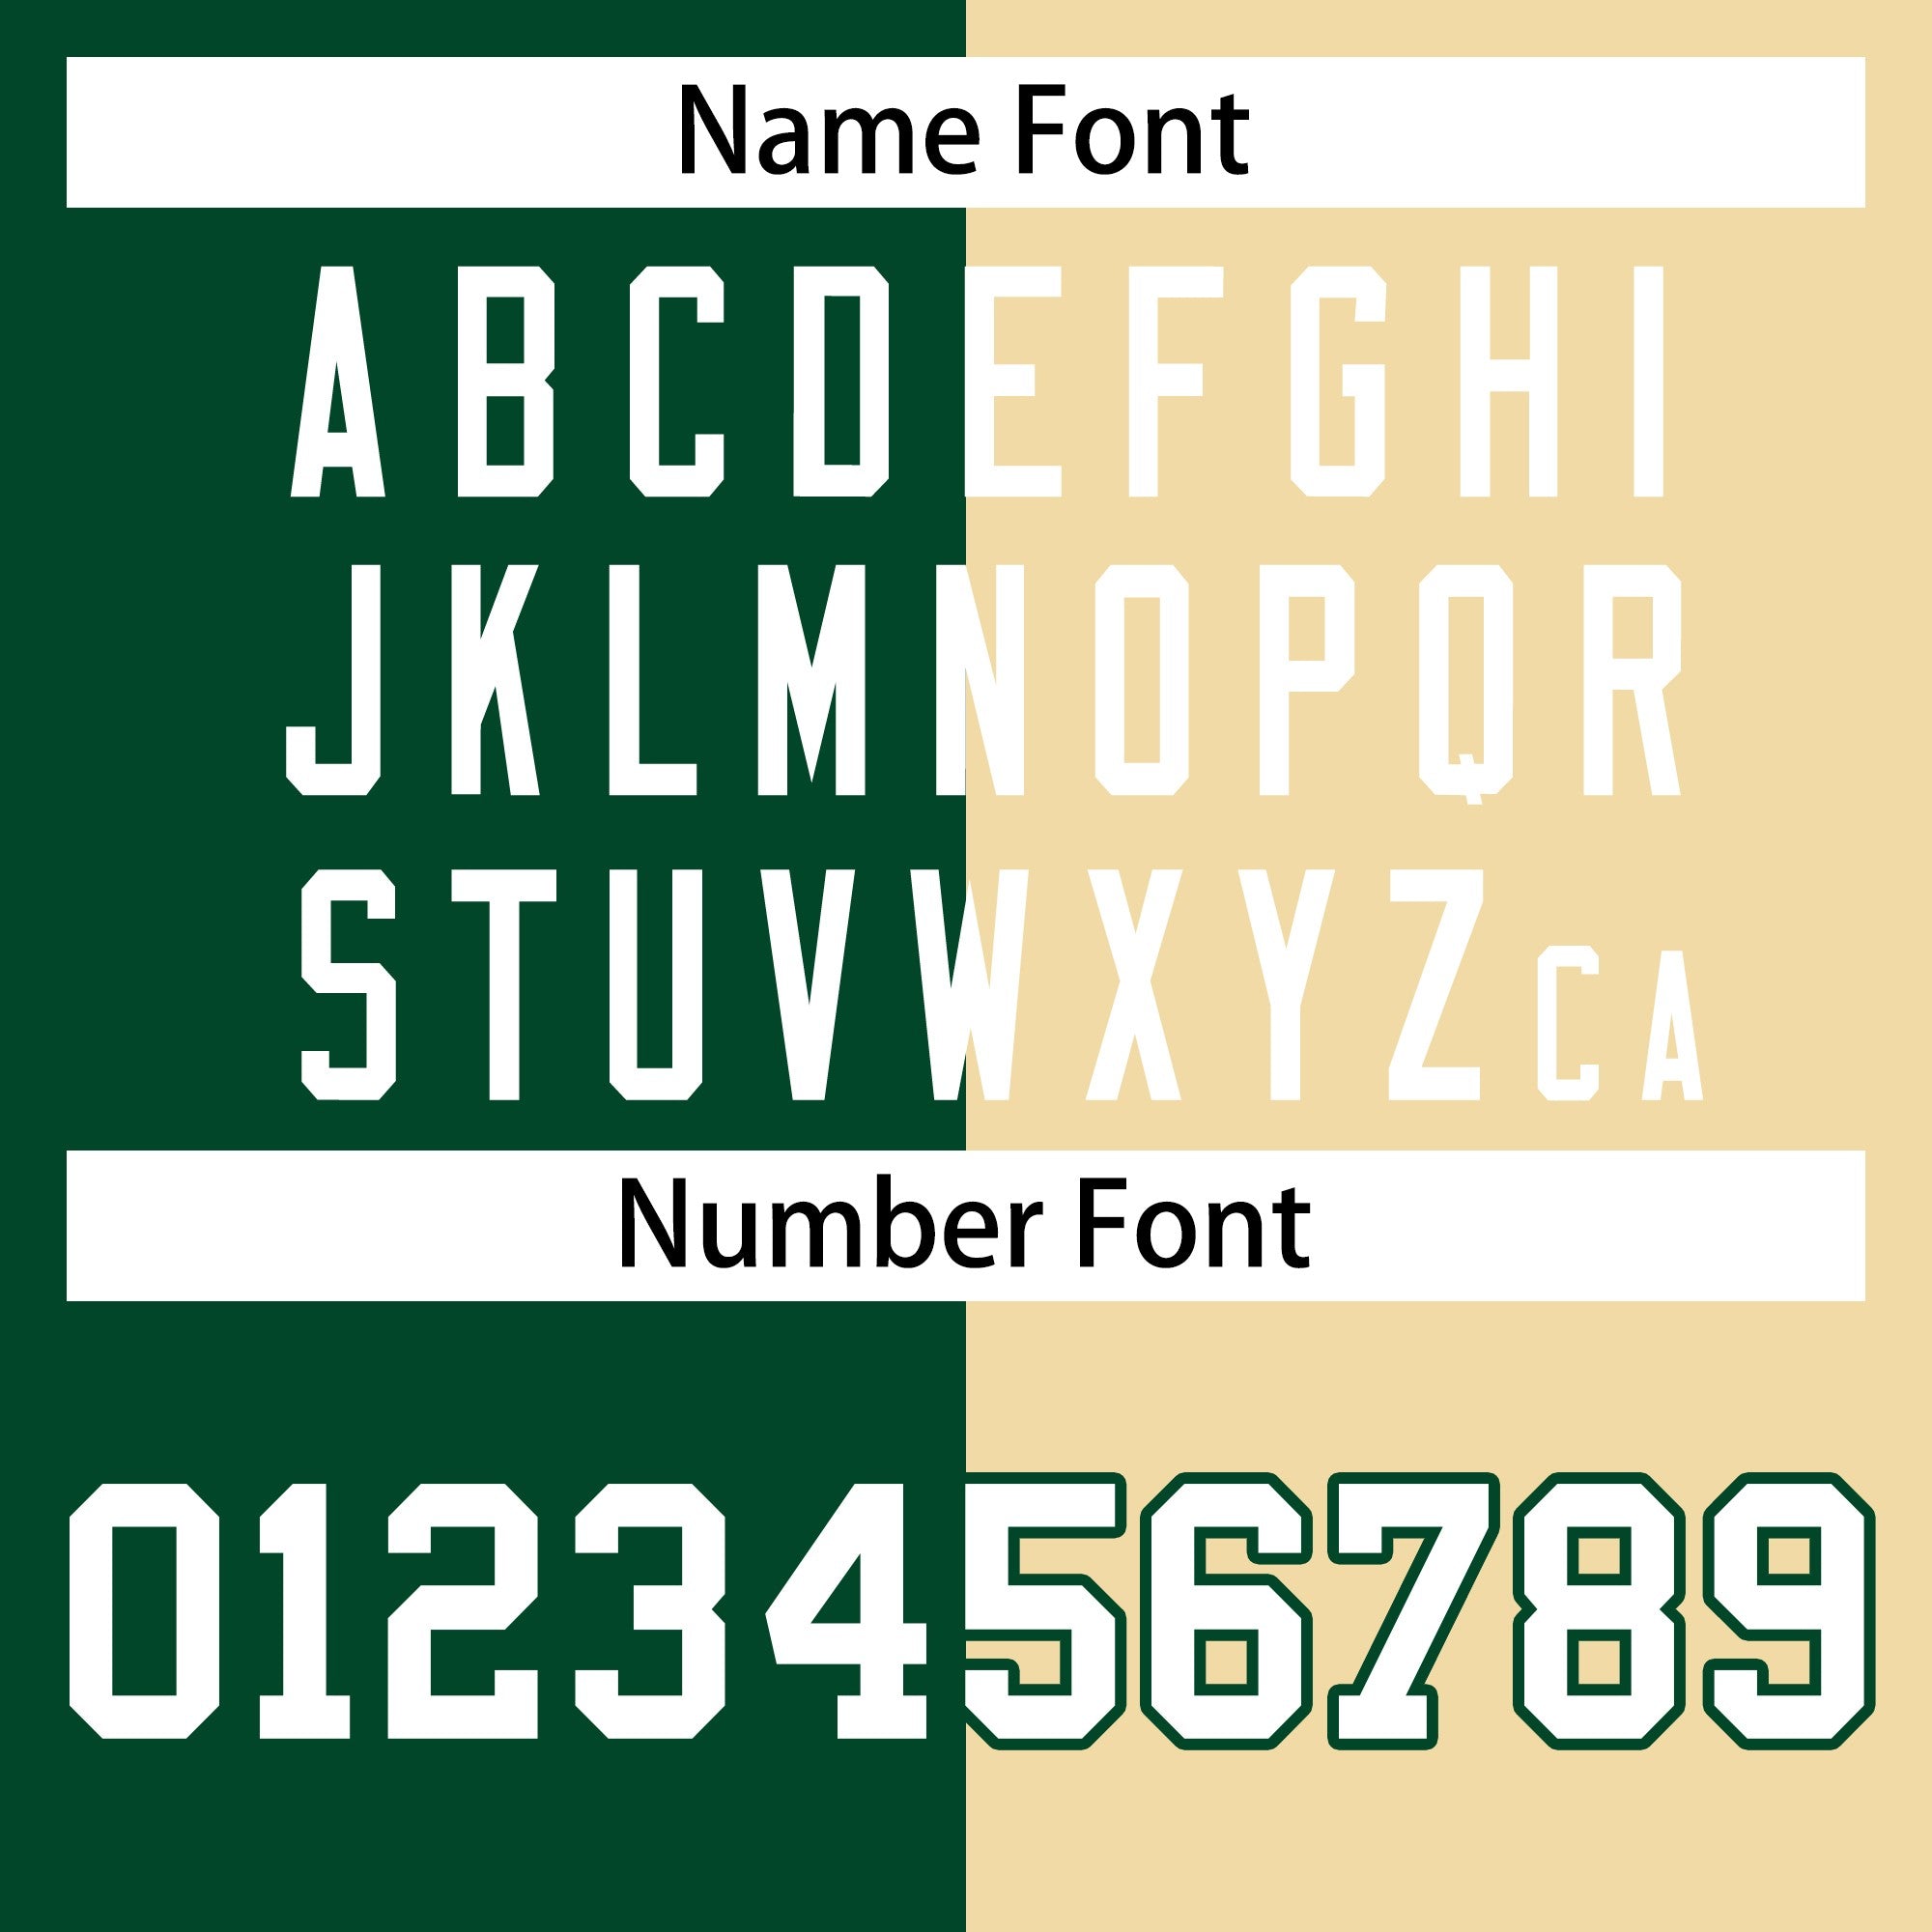 men's custom varsity jackets name and number font example